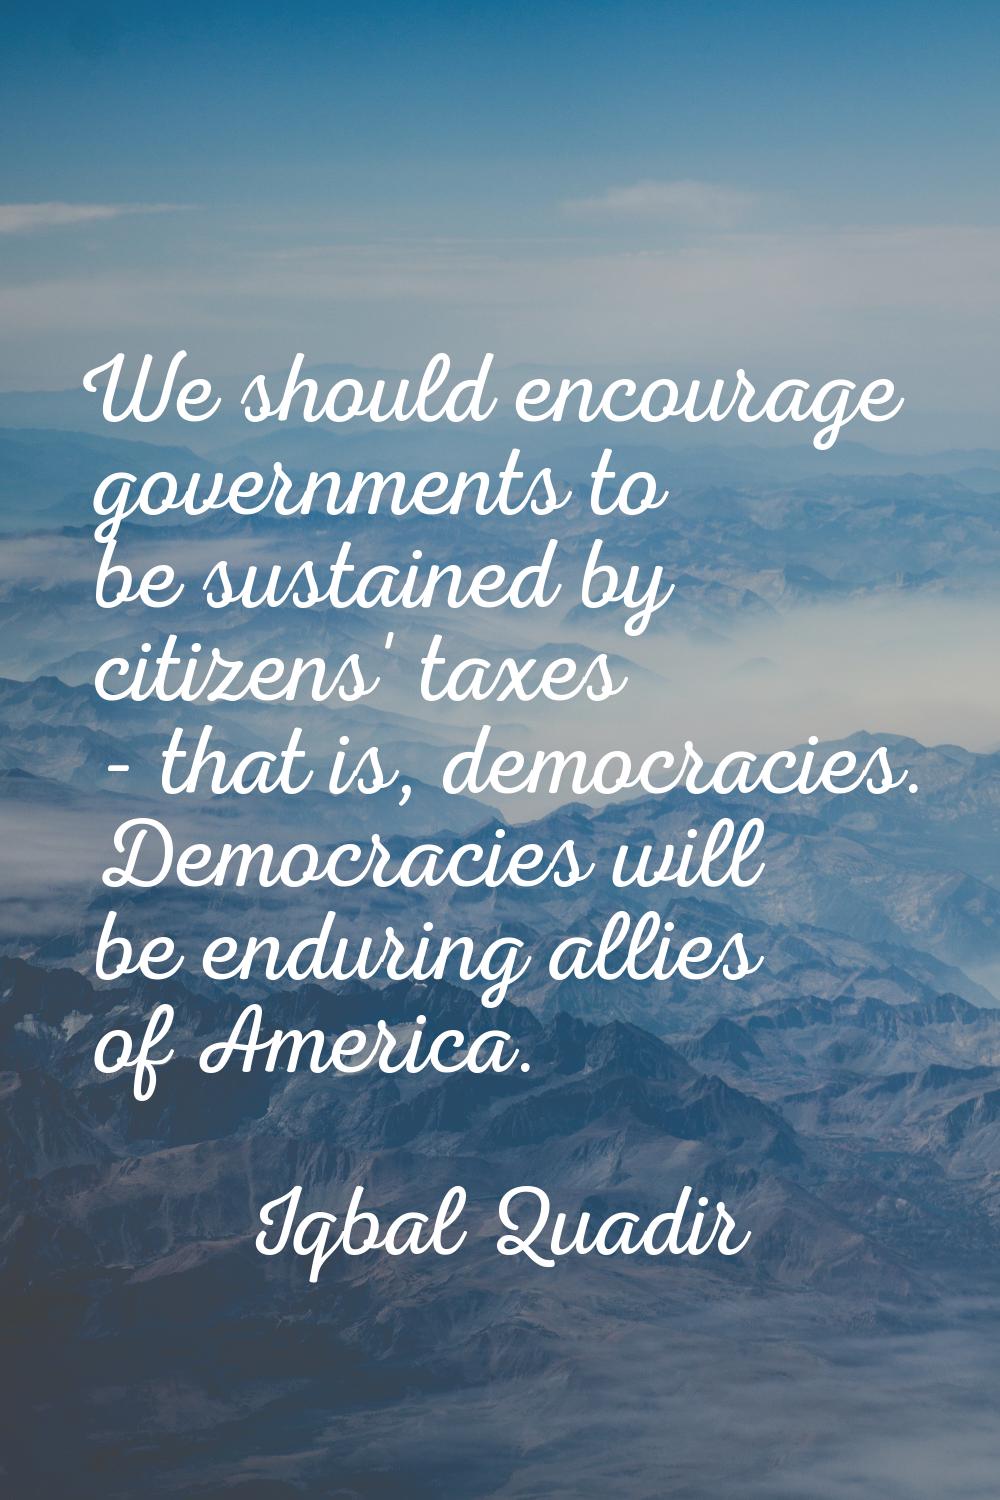 We should encourage governments to be sustained by citizens' taxes - that is, democracies. Democrac